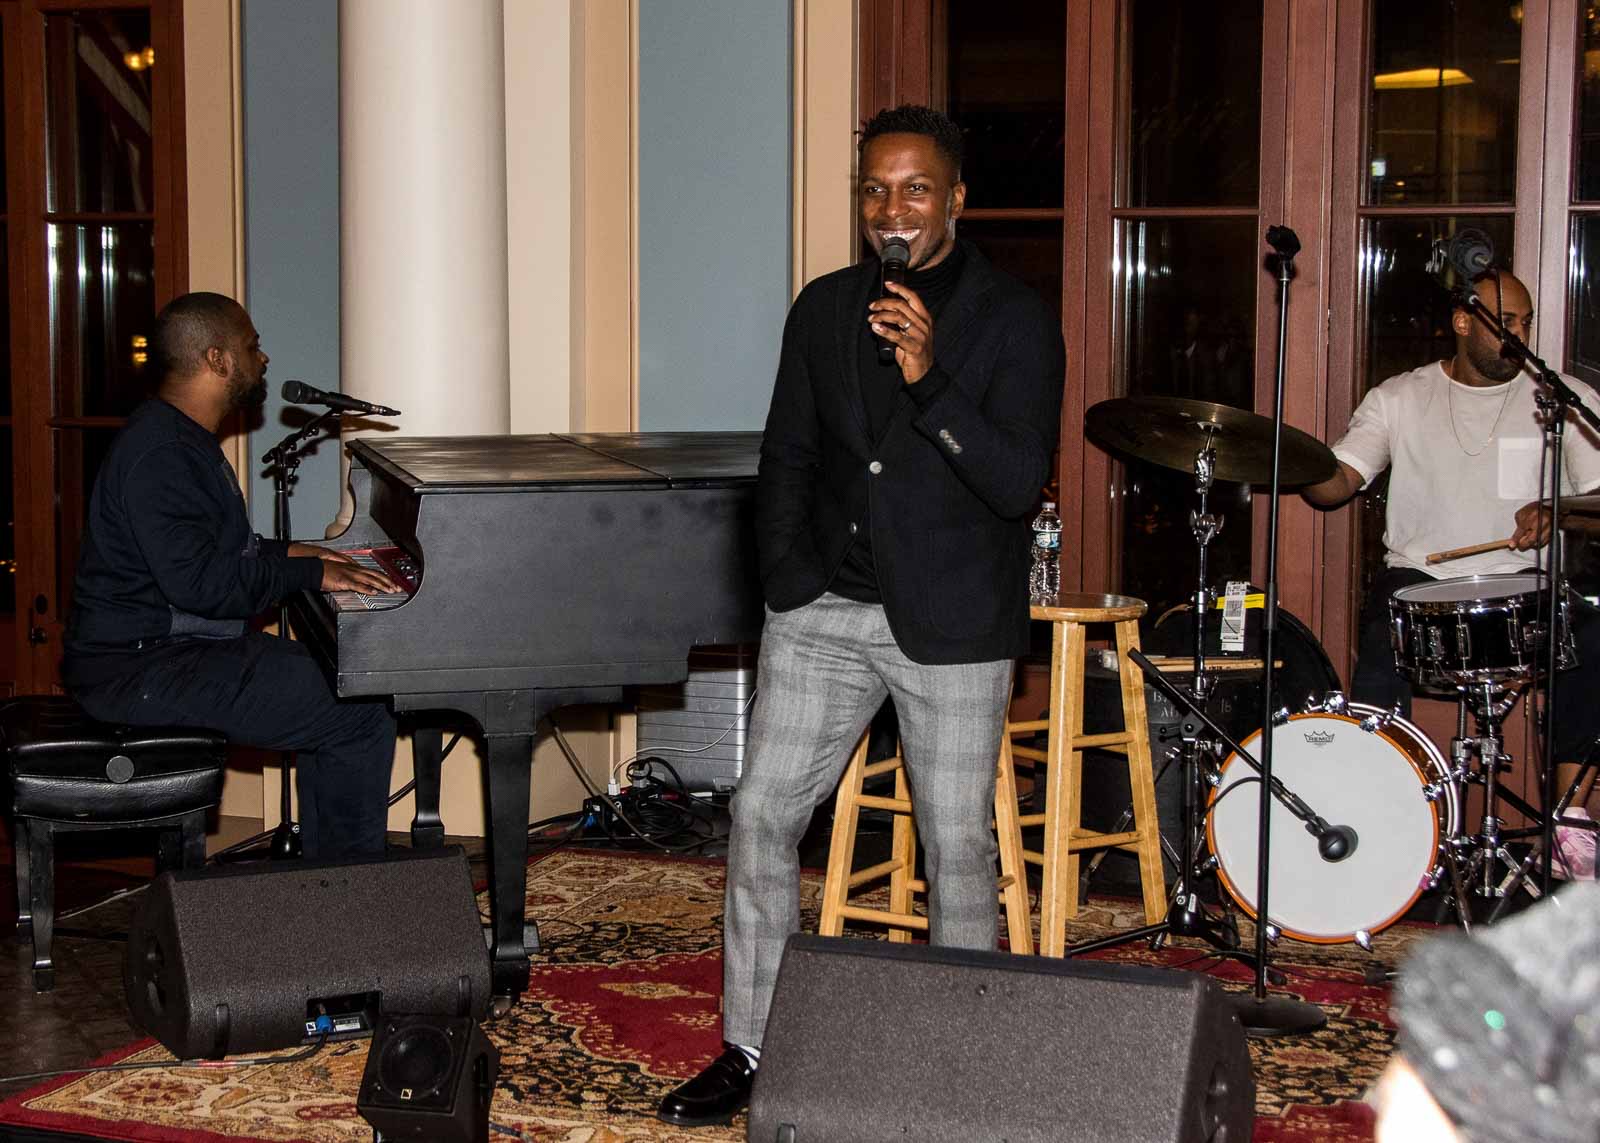 Photos of PHILADANCO 50th Anniversary VIP Party featuring Leslie Odom, Jr.